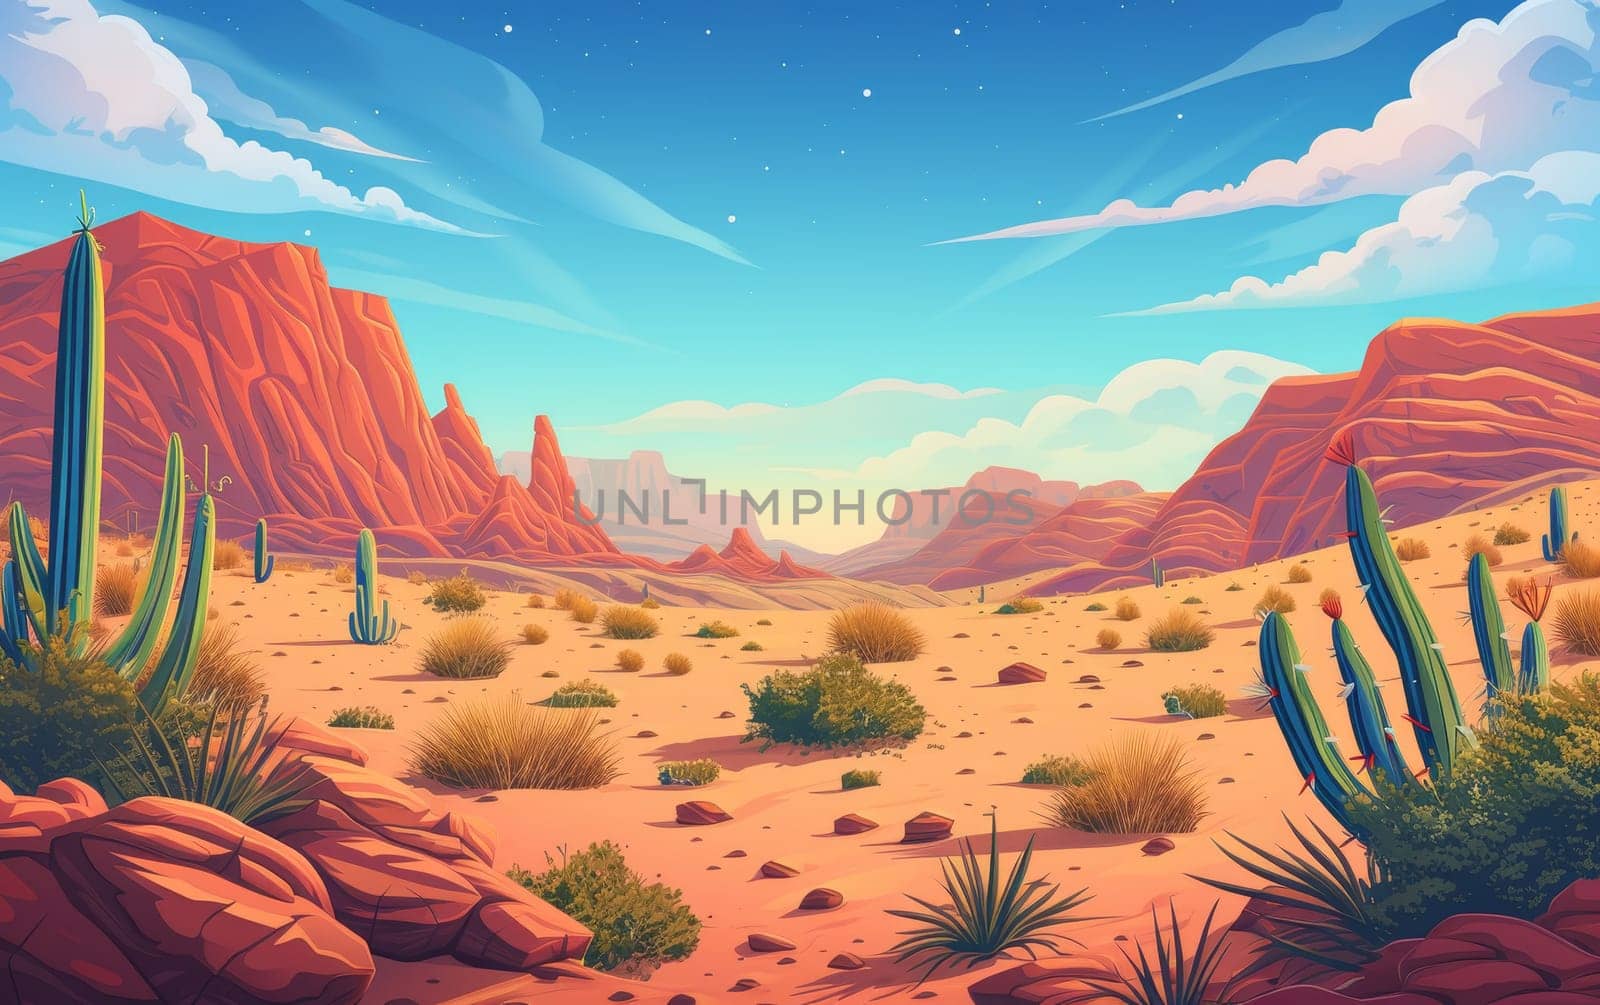 Vibrant desert landscape with towering red rock formations, cacti, and a clear blue sky with wispy clouds